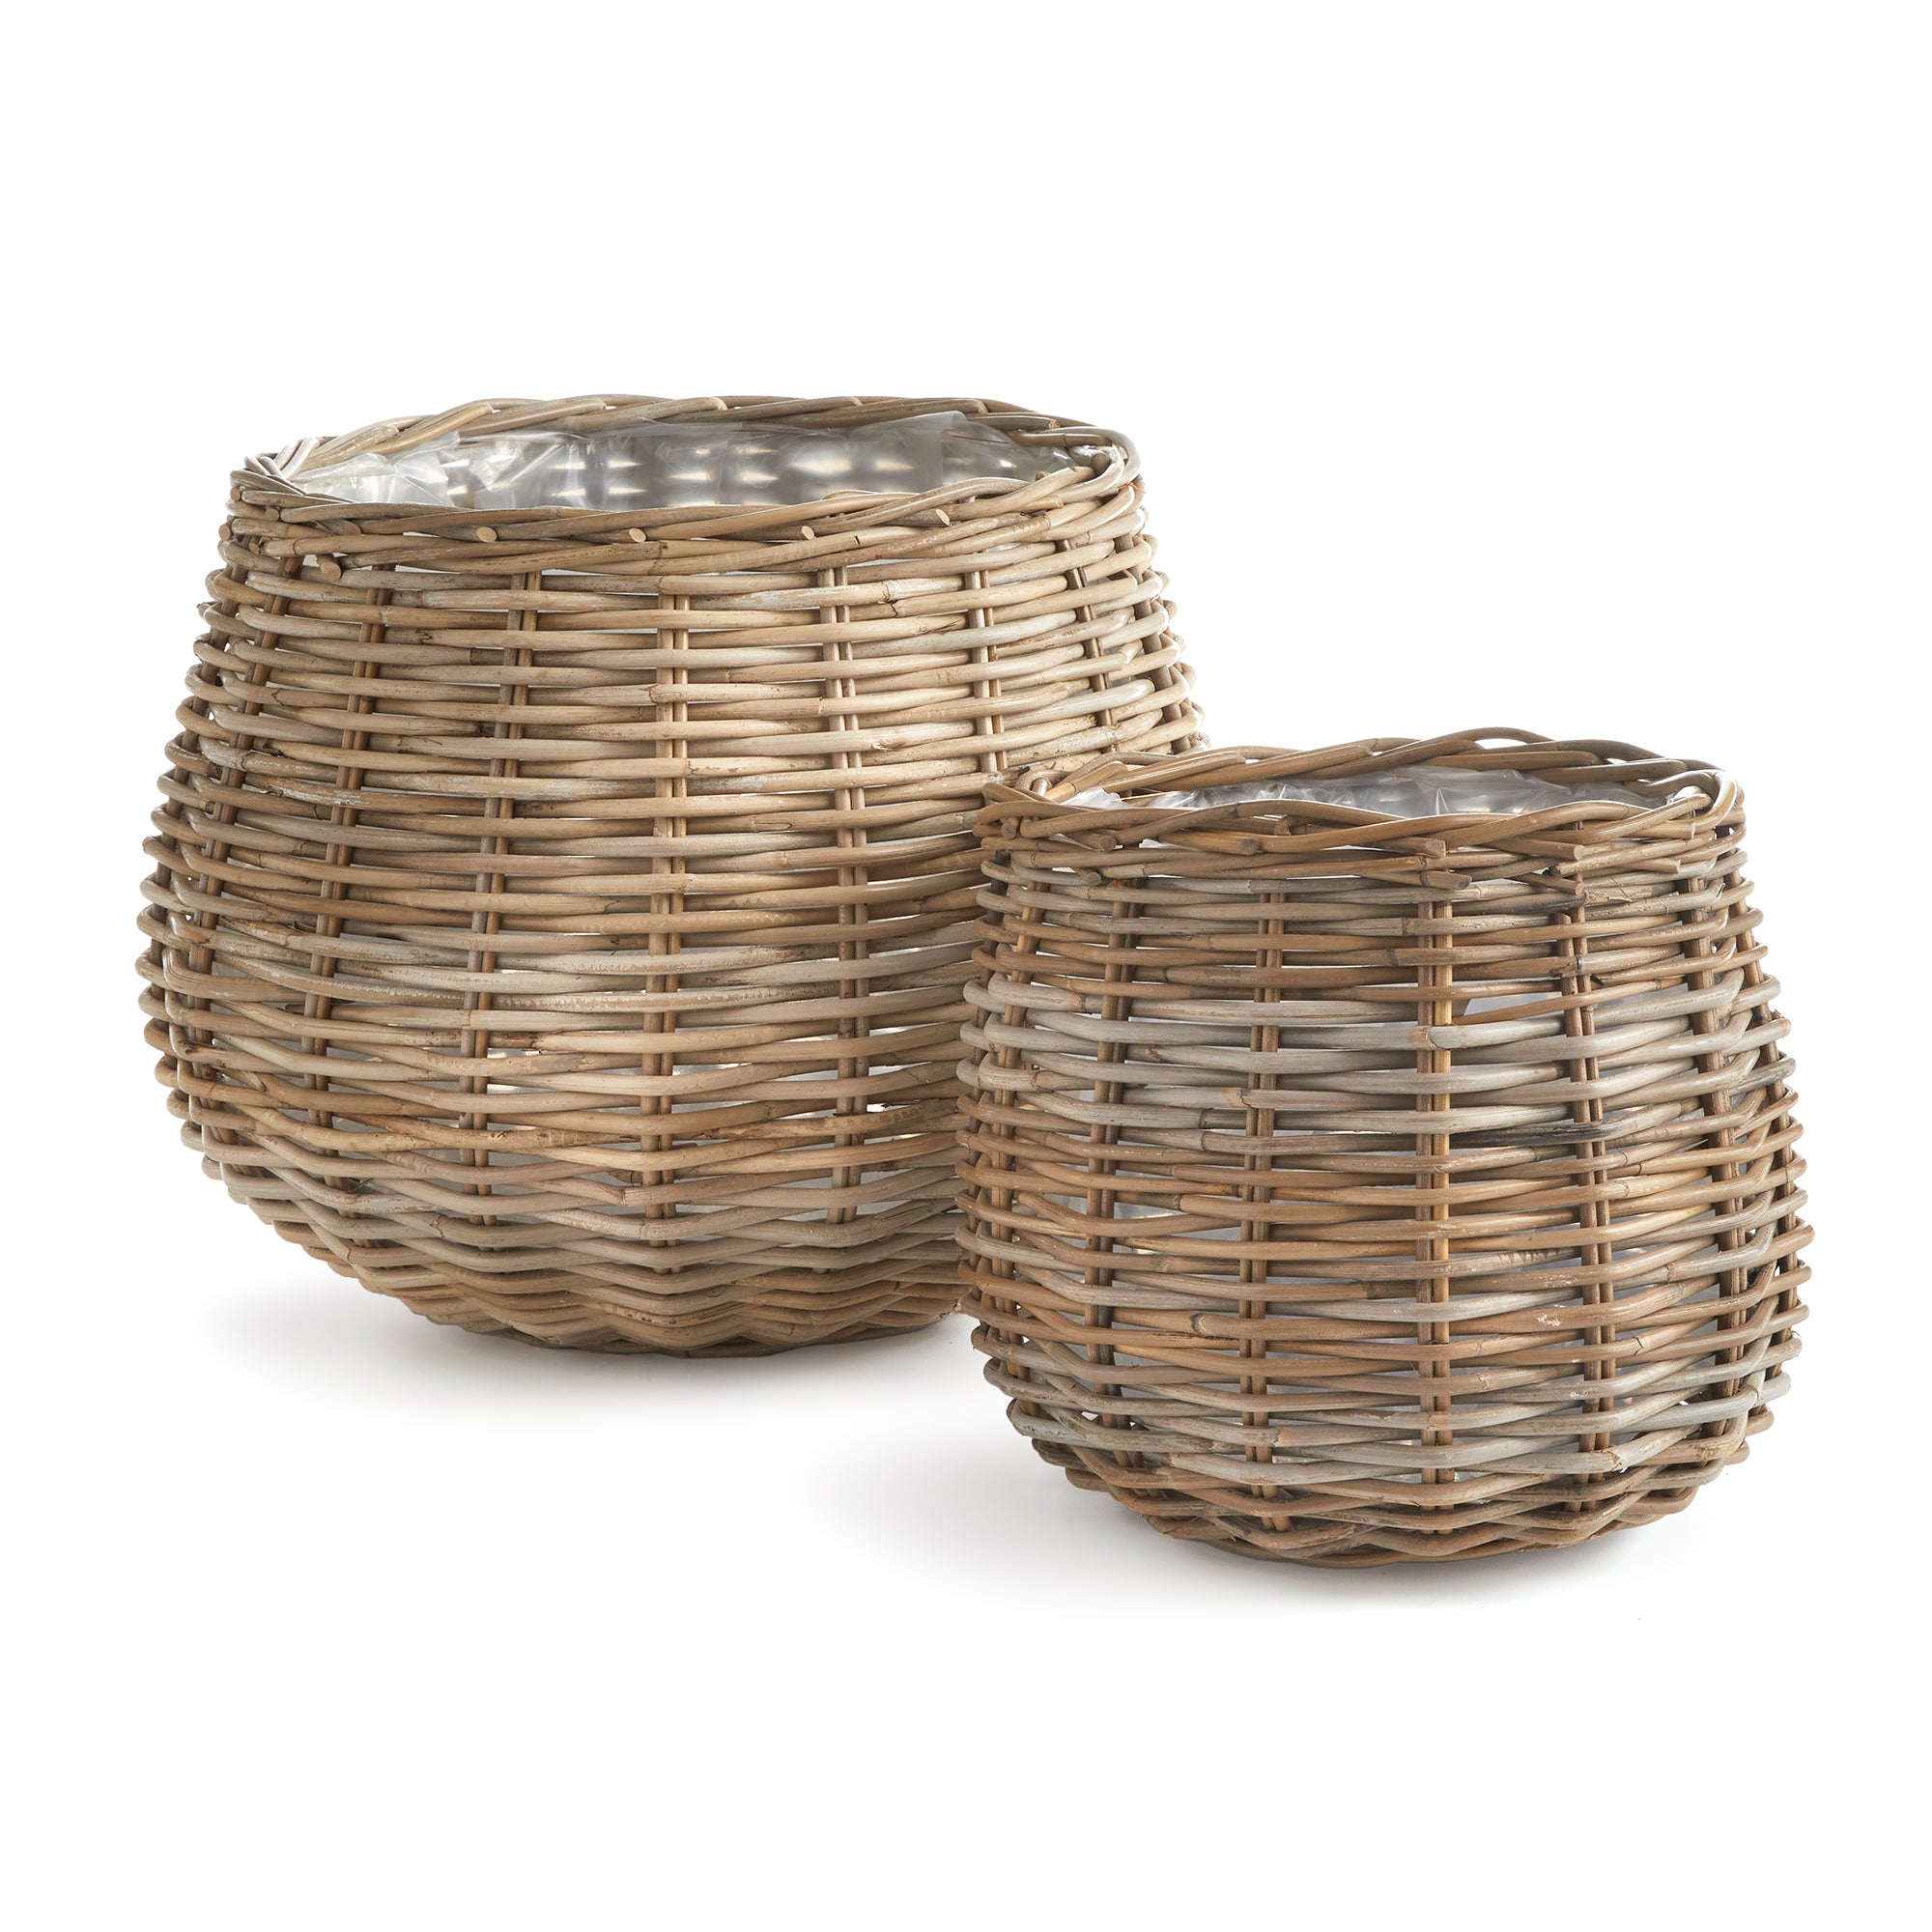 Beautifully woven rattan baskets, largescale and lined with a thick plastic, how smart! The perfect vessels for your favorite tree or large leafy plants. Amethyst Home provides interior design, new construction, custom furniture, and area rugs in the Park City metro area.